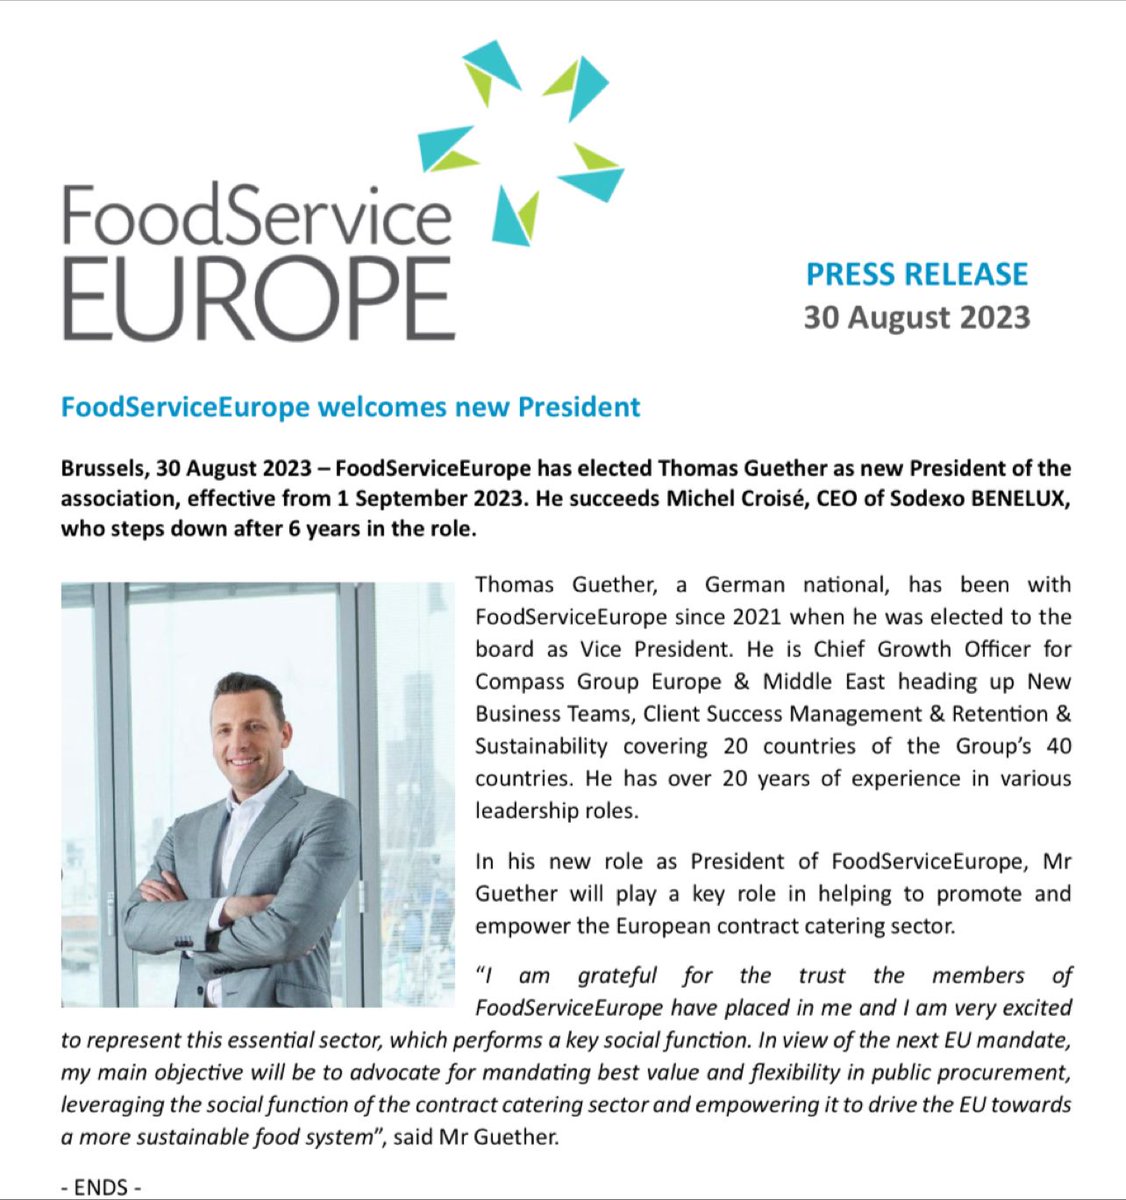 We are glad to announce that @GuetherThomas has been elected new President of our association. He will play a key role in helping to promote and empower the European #ContractCatering sector. Read more👉tinyurl.com/3fsbkax7